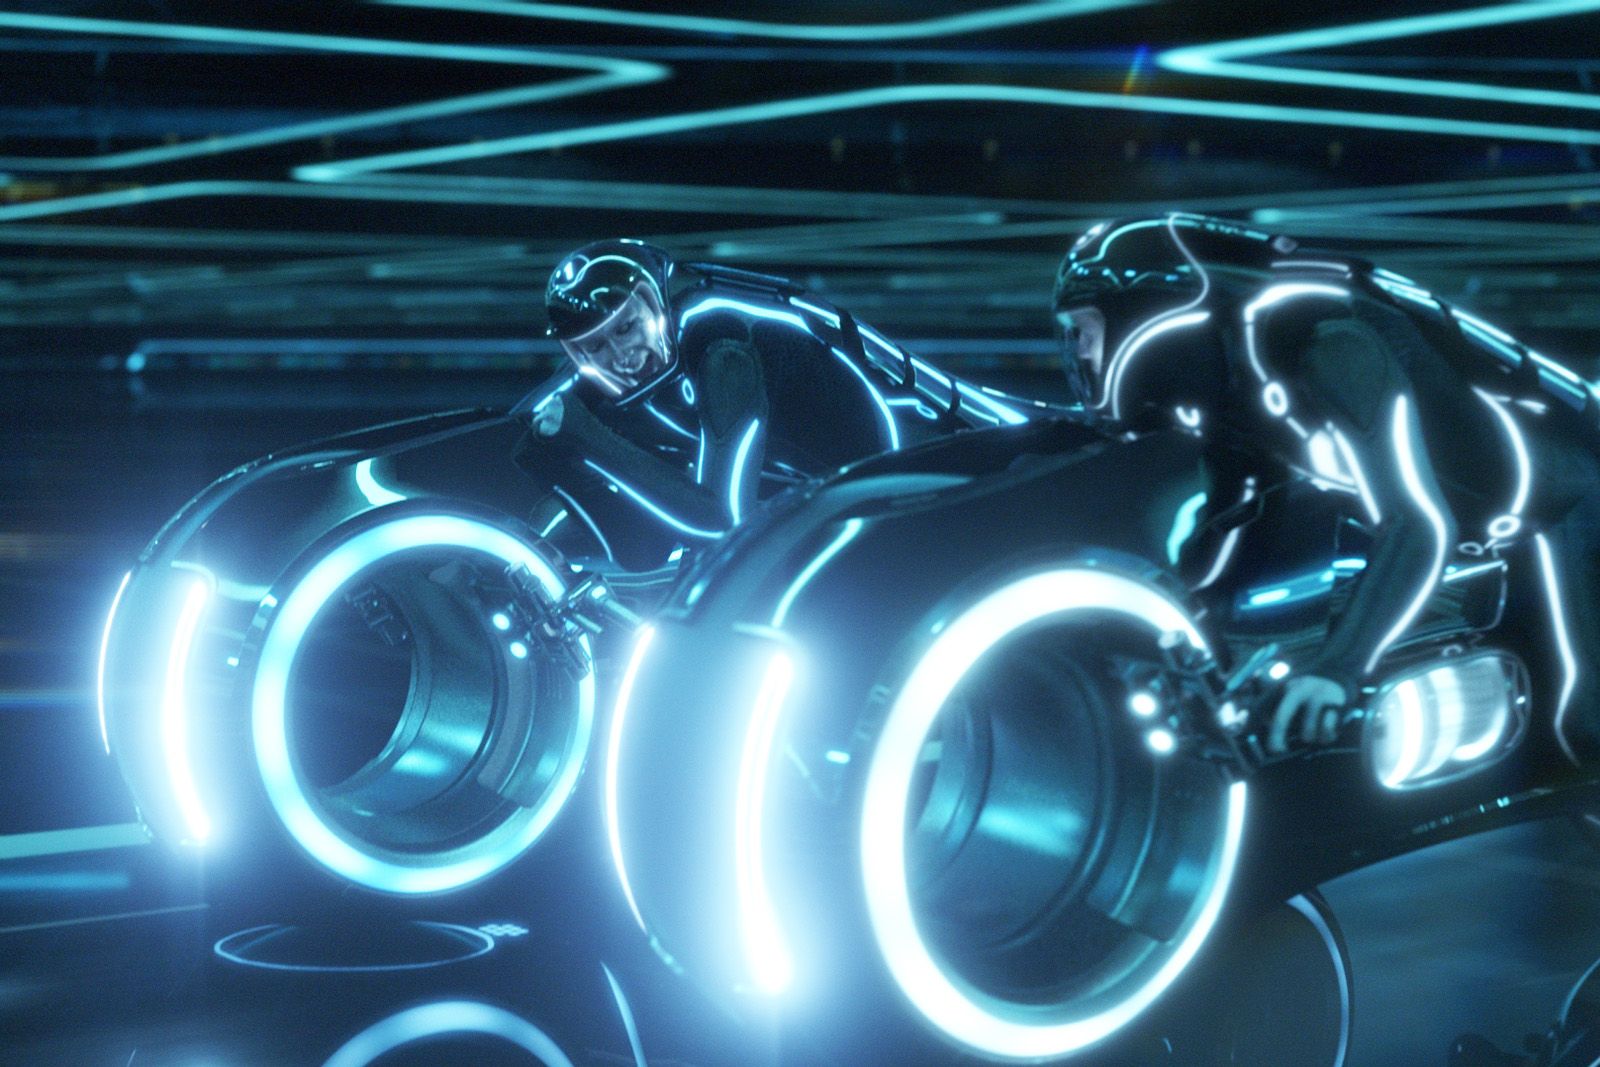 Tron Legacy still - two characters on bikes